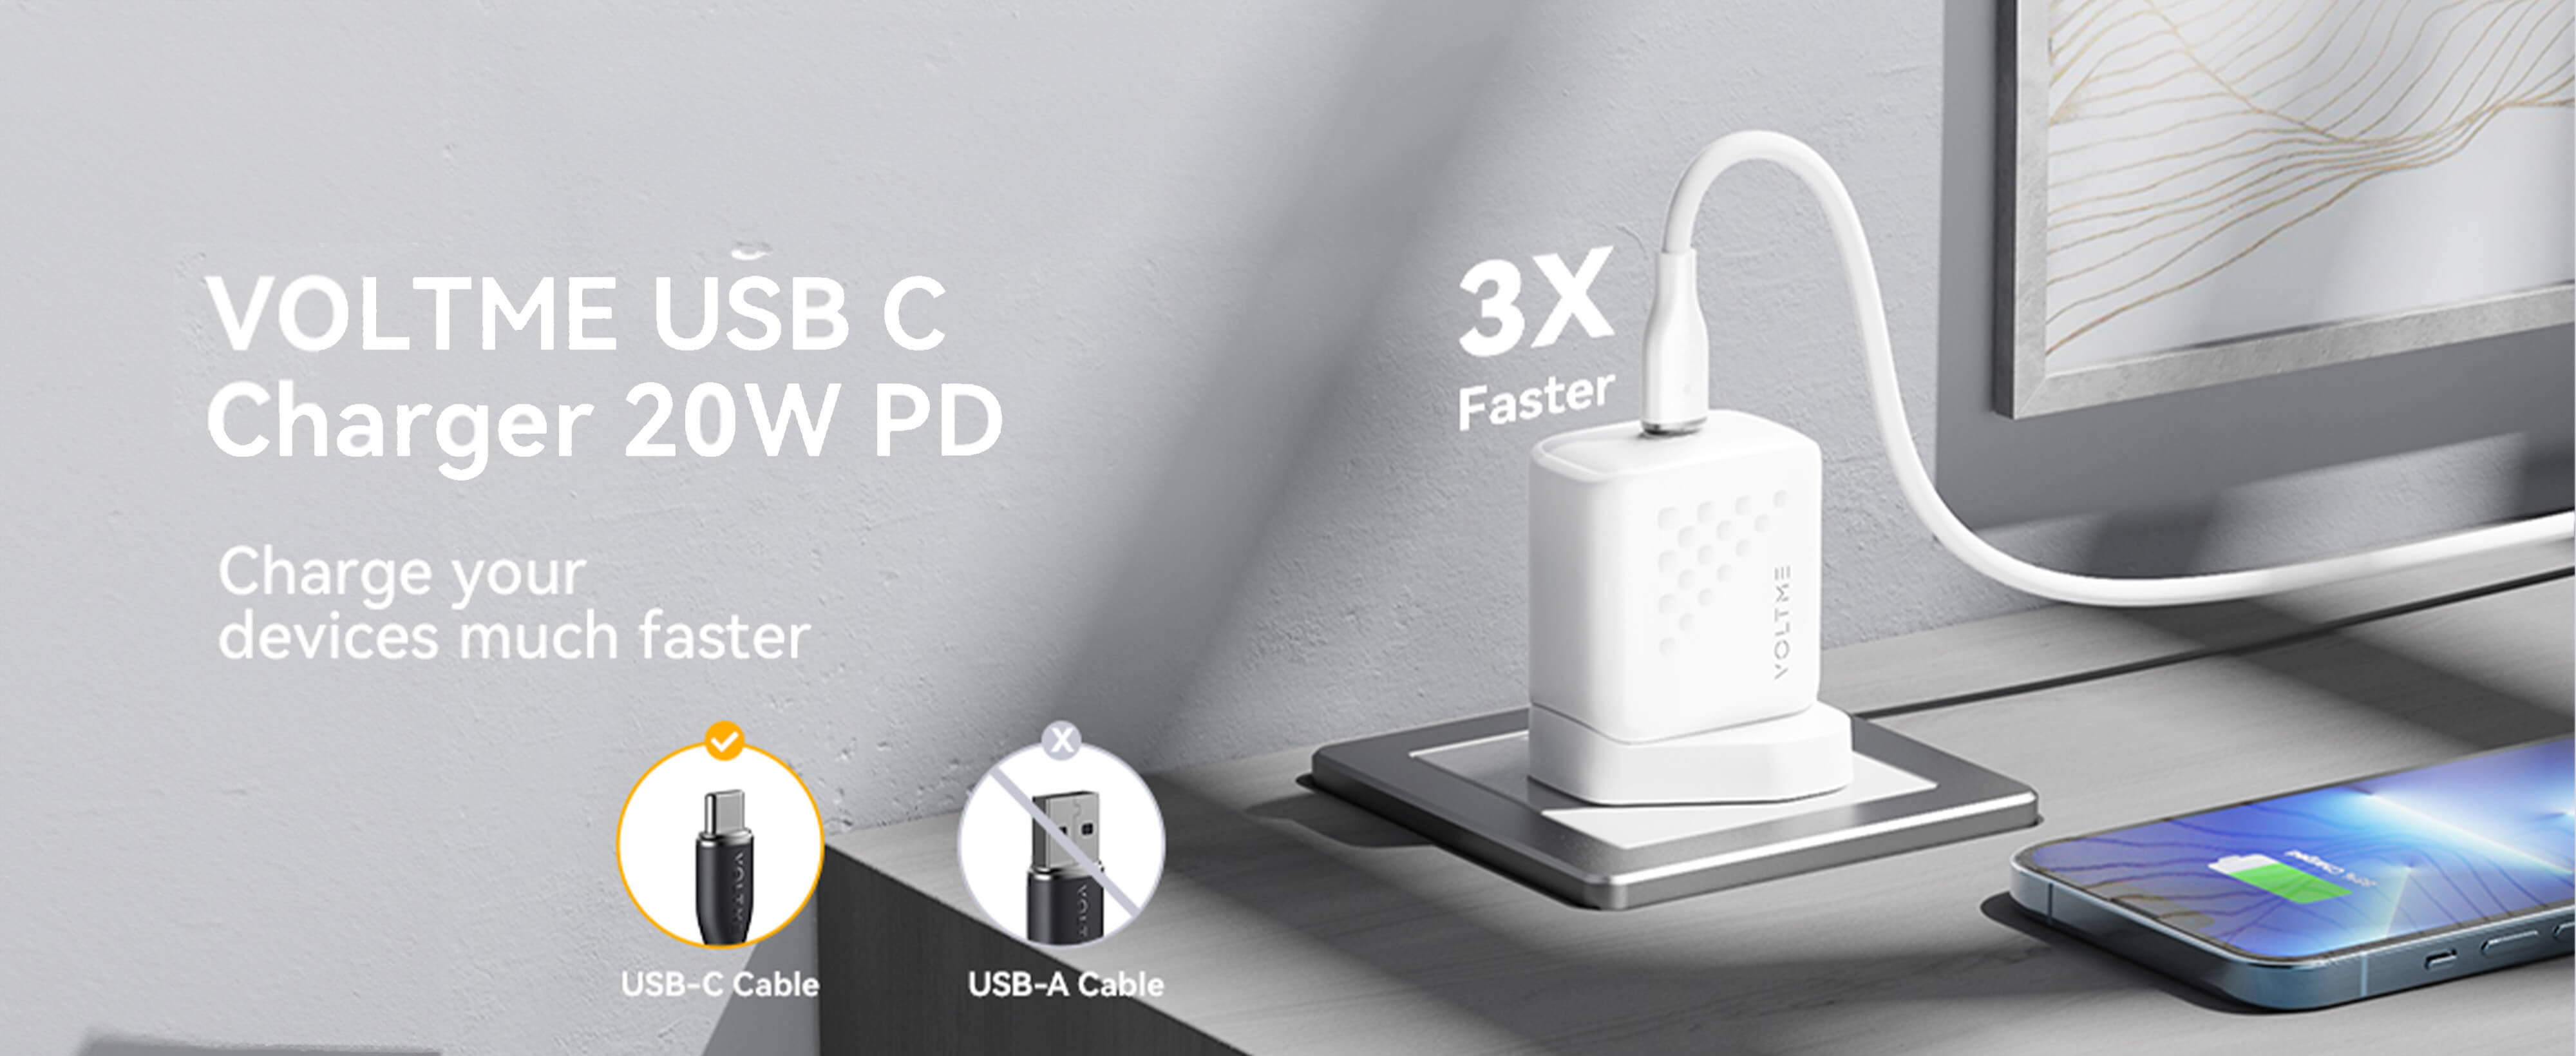 Voltme Revo 20 Lite Wall Charger (20W) White